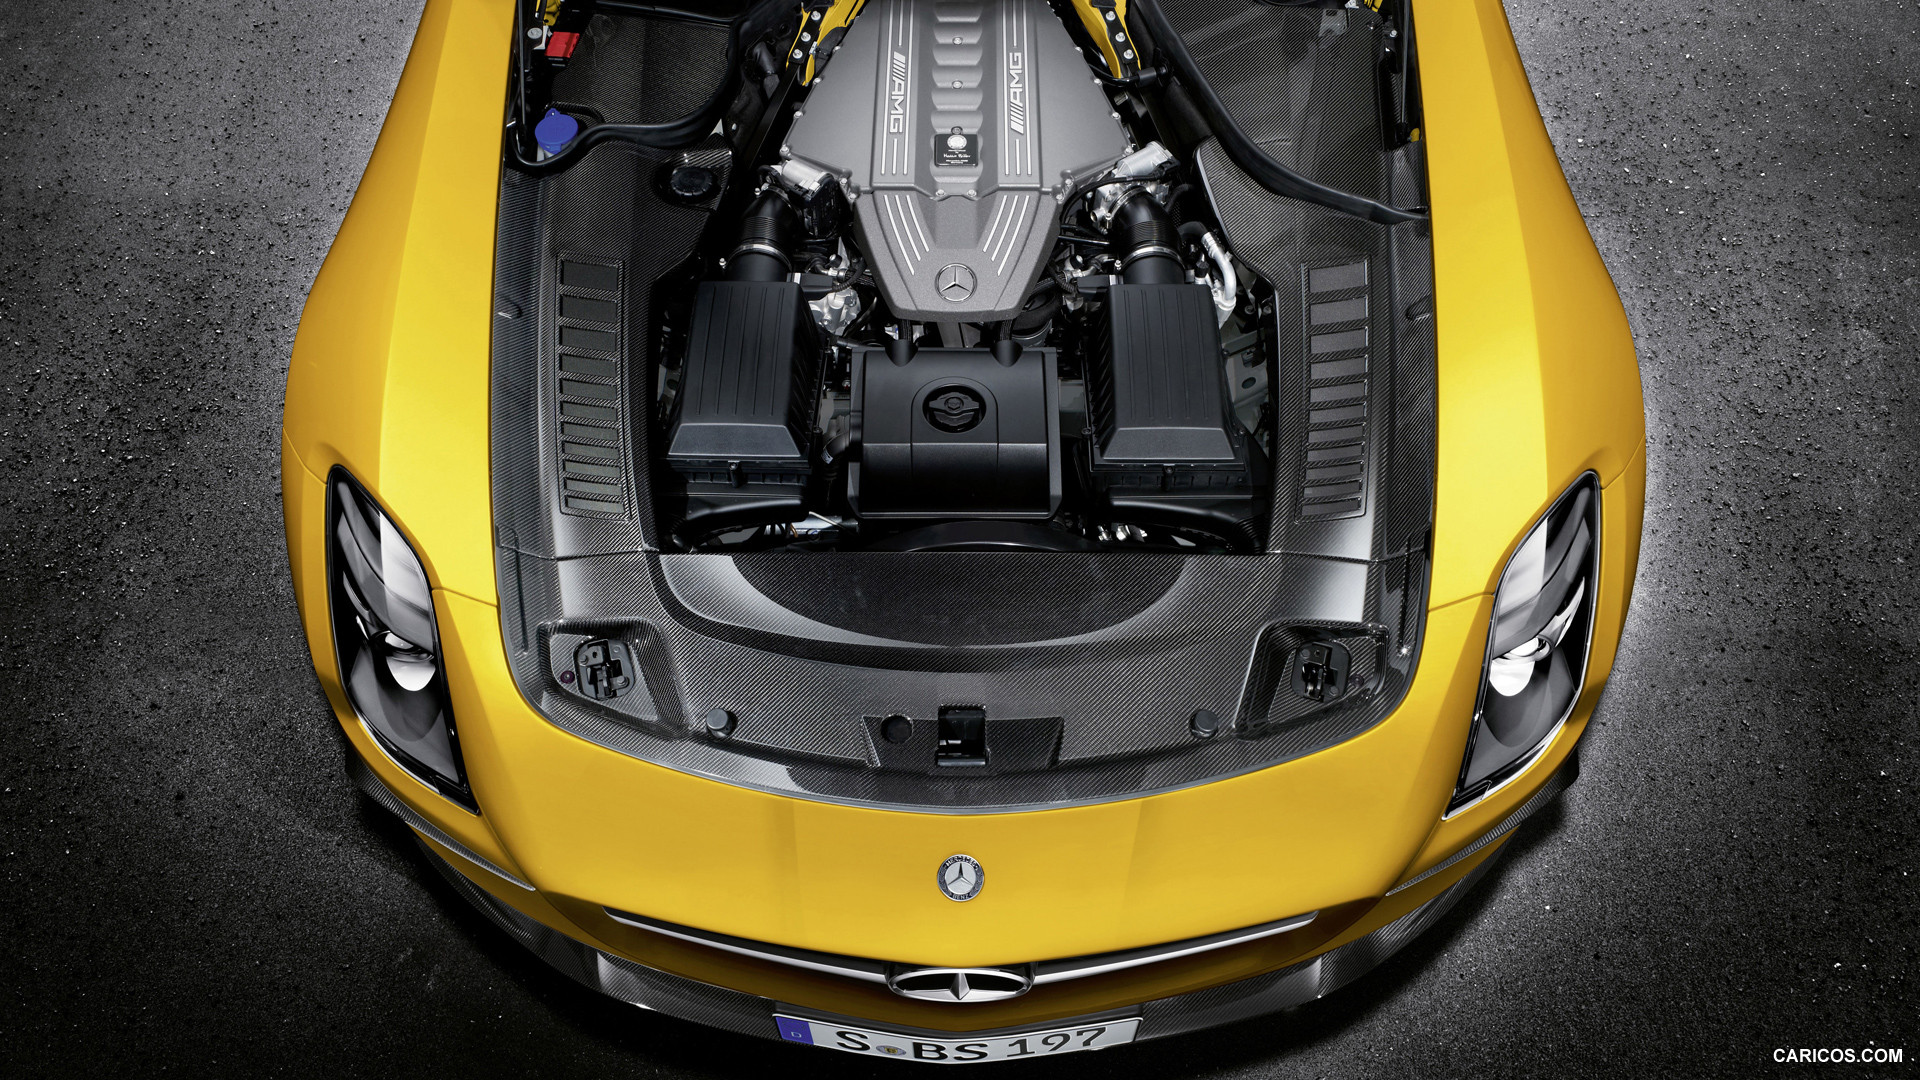 2014 Mercedes-Benz SLS AMG Coupe Black Series Solarbeam - Engine, #18 of 40